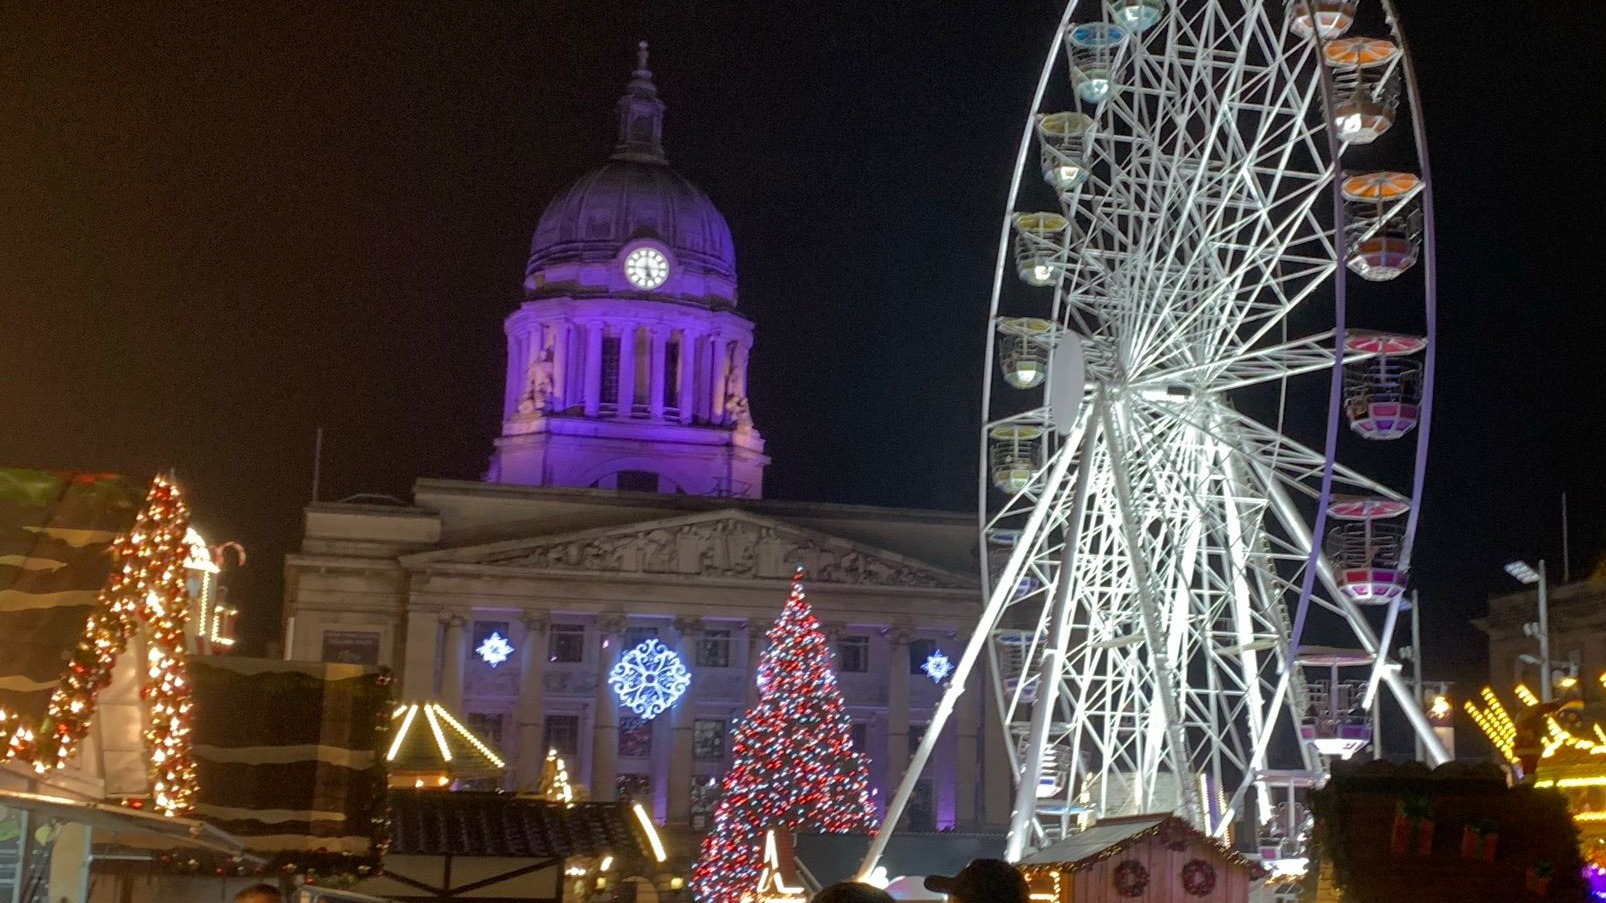 Nottingham Winter Wonderland Everything you need to know about